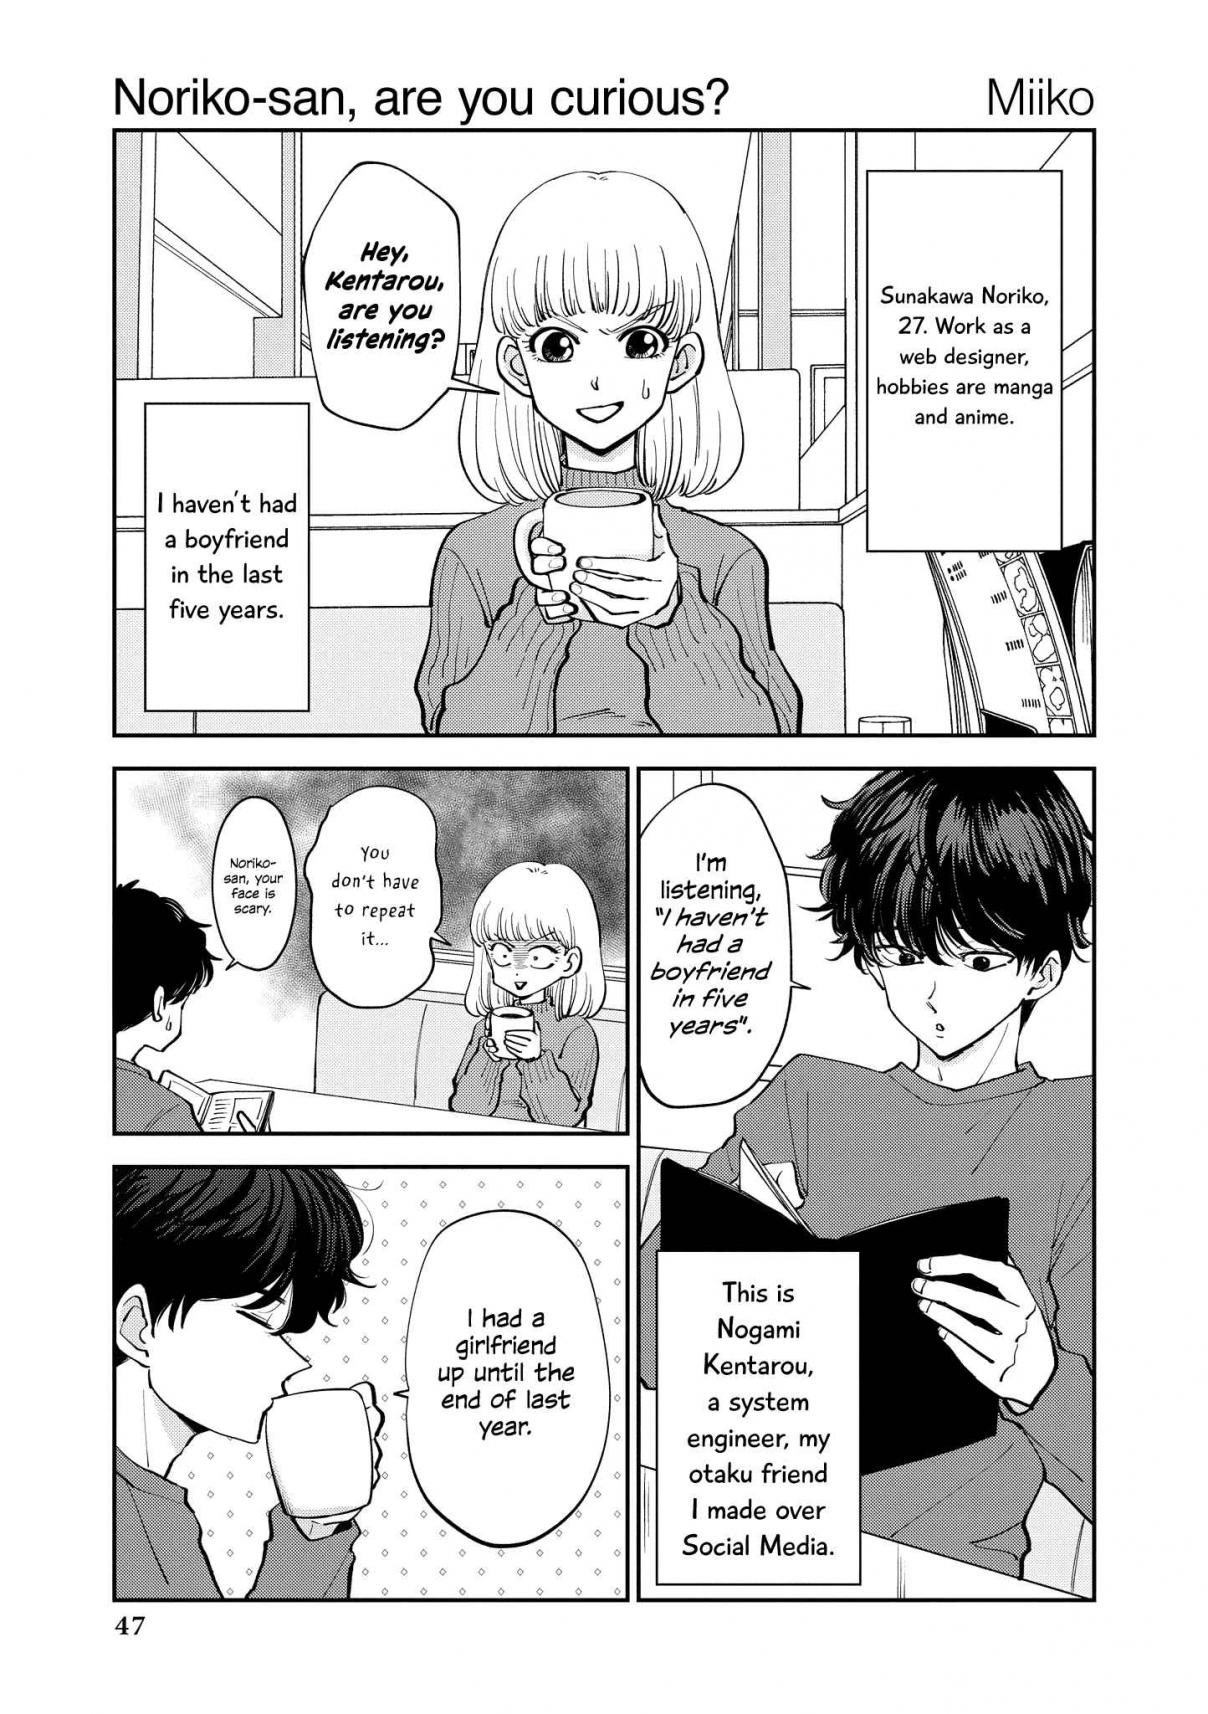 “It’s Too Precious and Hard to Read!!” 4P Short Stories Vol. 2 Ch. 34 Noriko san, are you curious? [by Miiko]